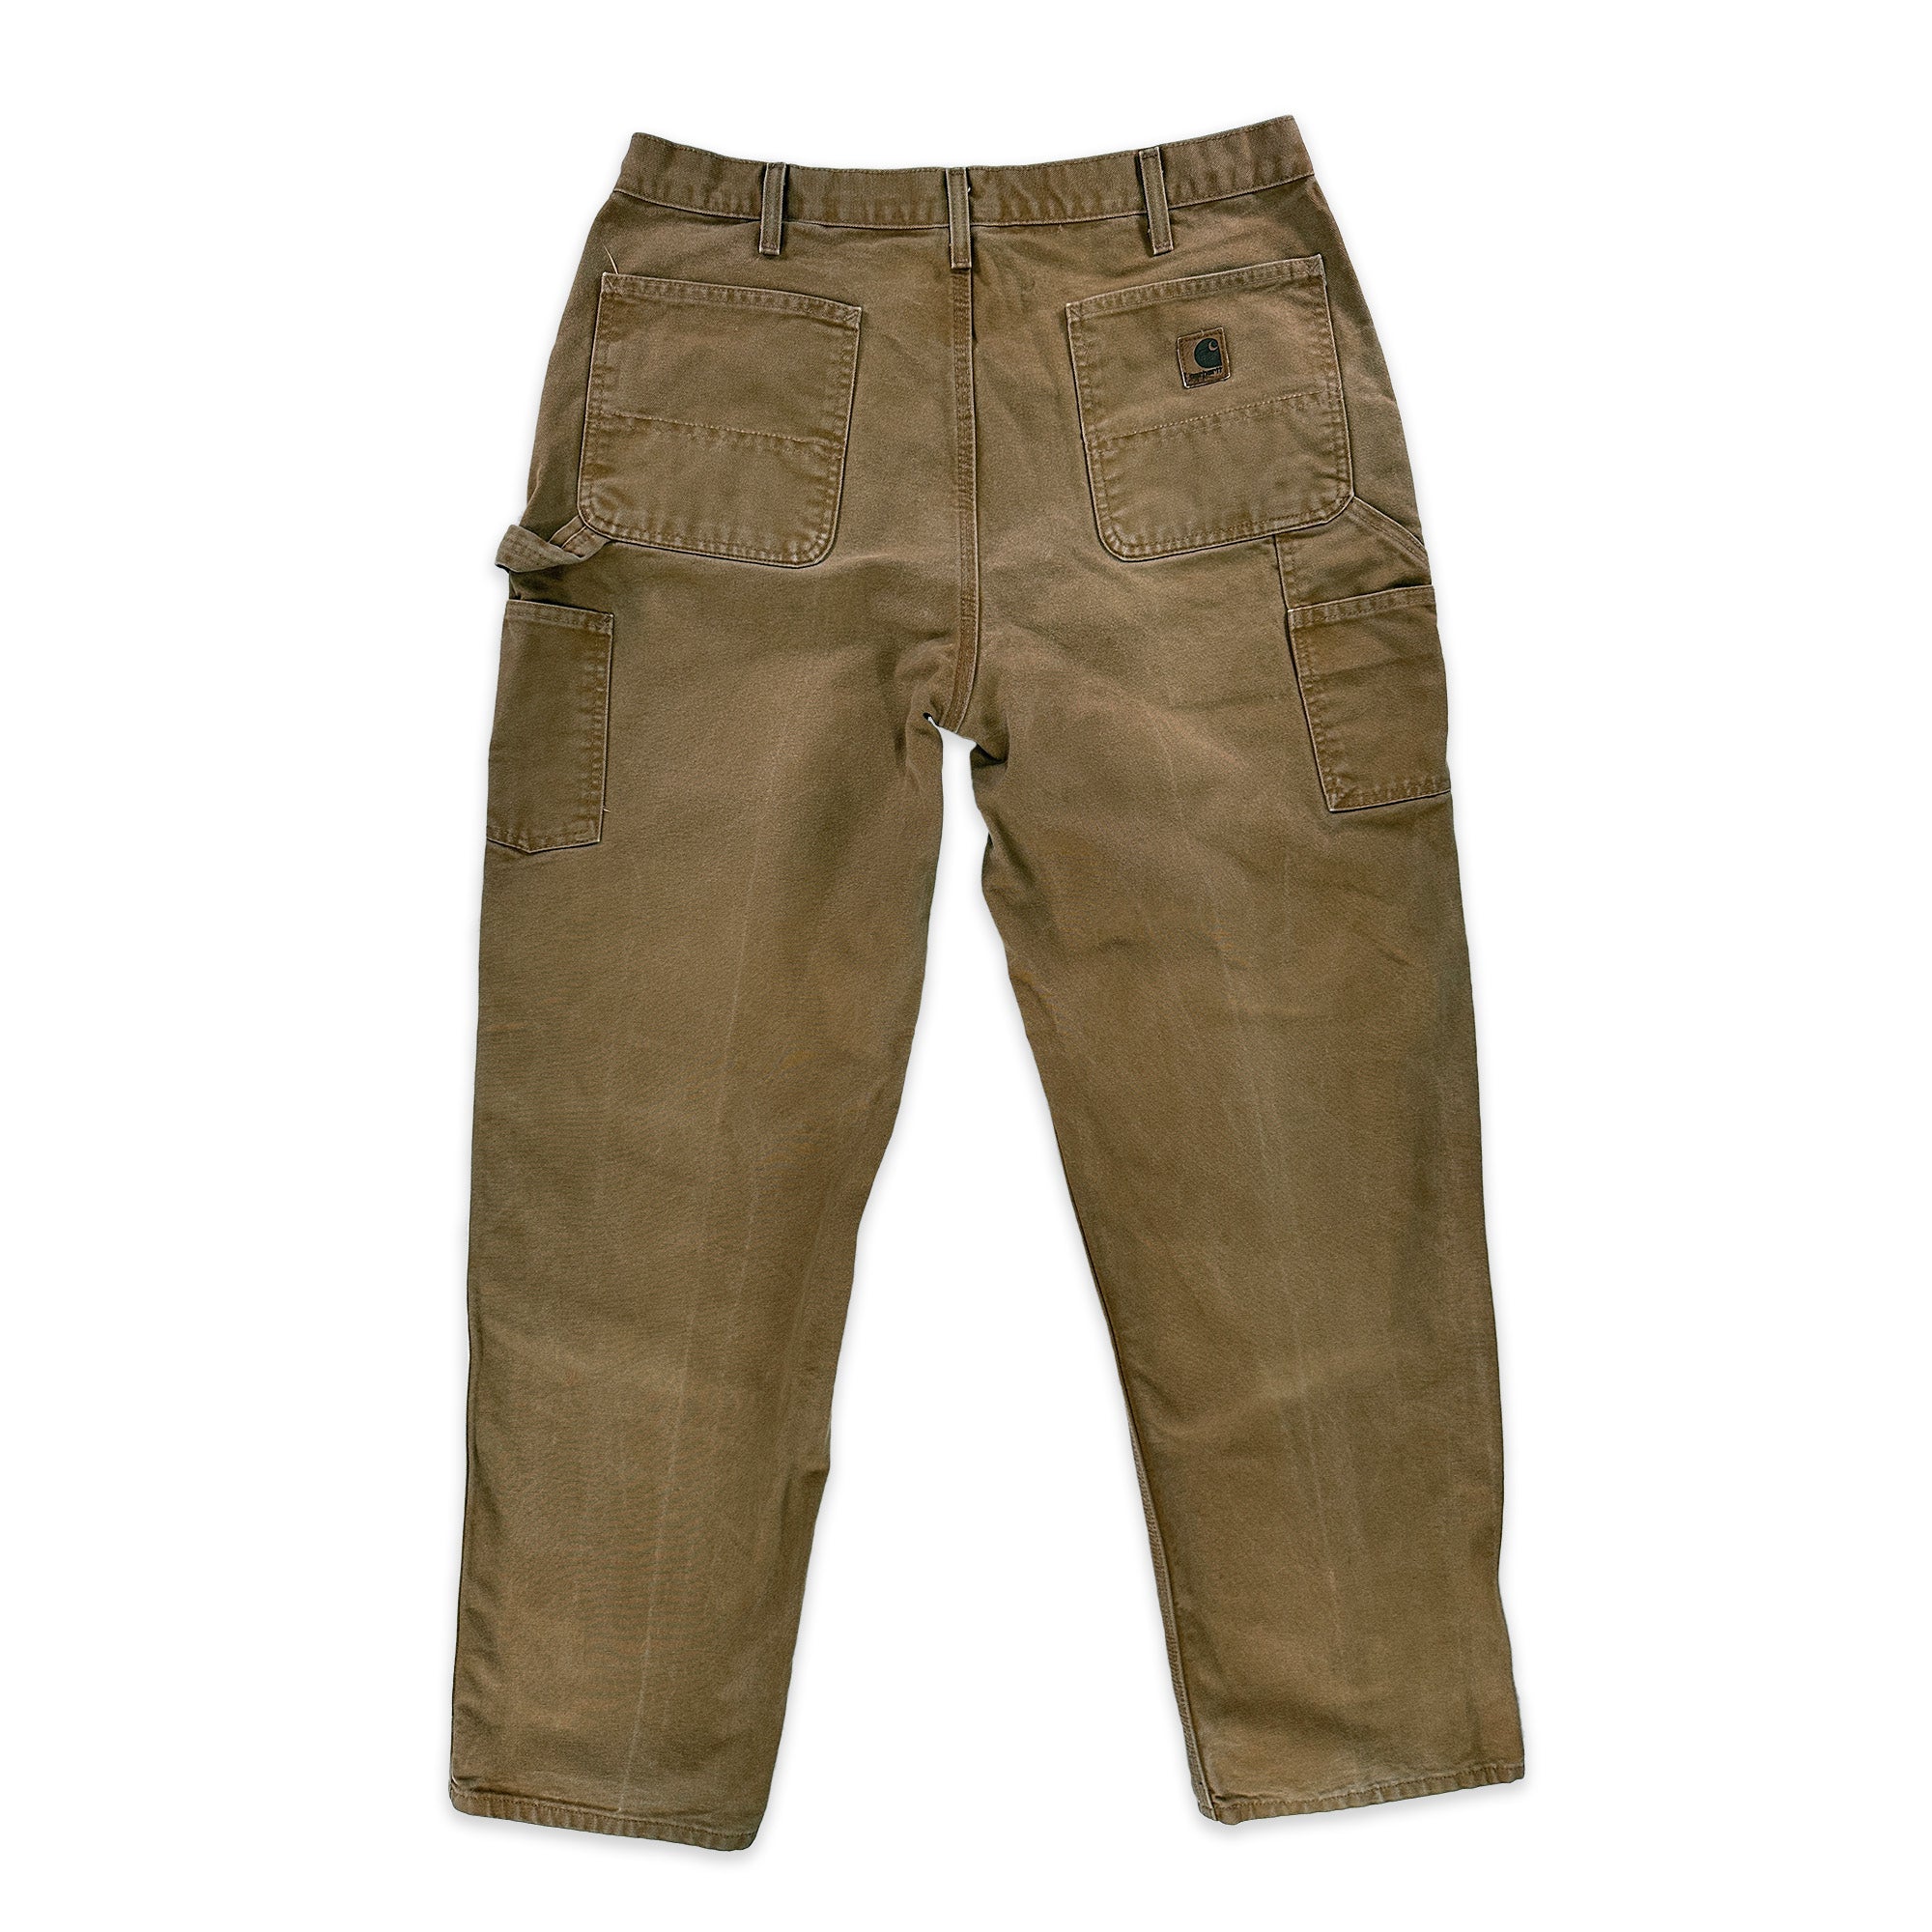 Carhartt B11 BRN Washed Duck Loose Fit Pant - Men's 36x34-2